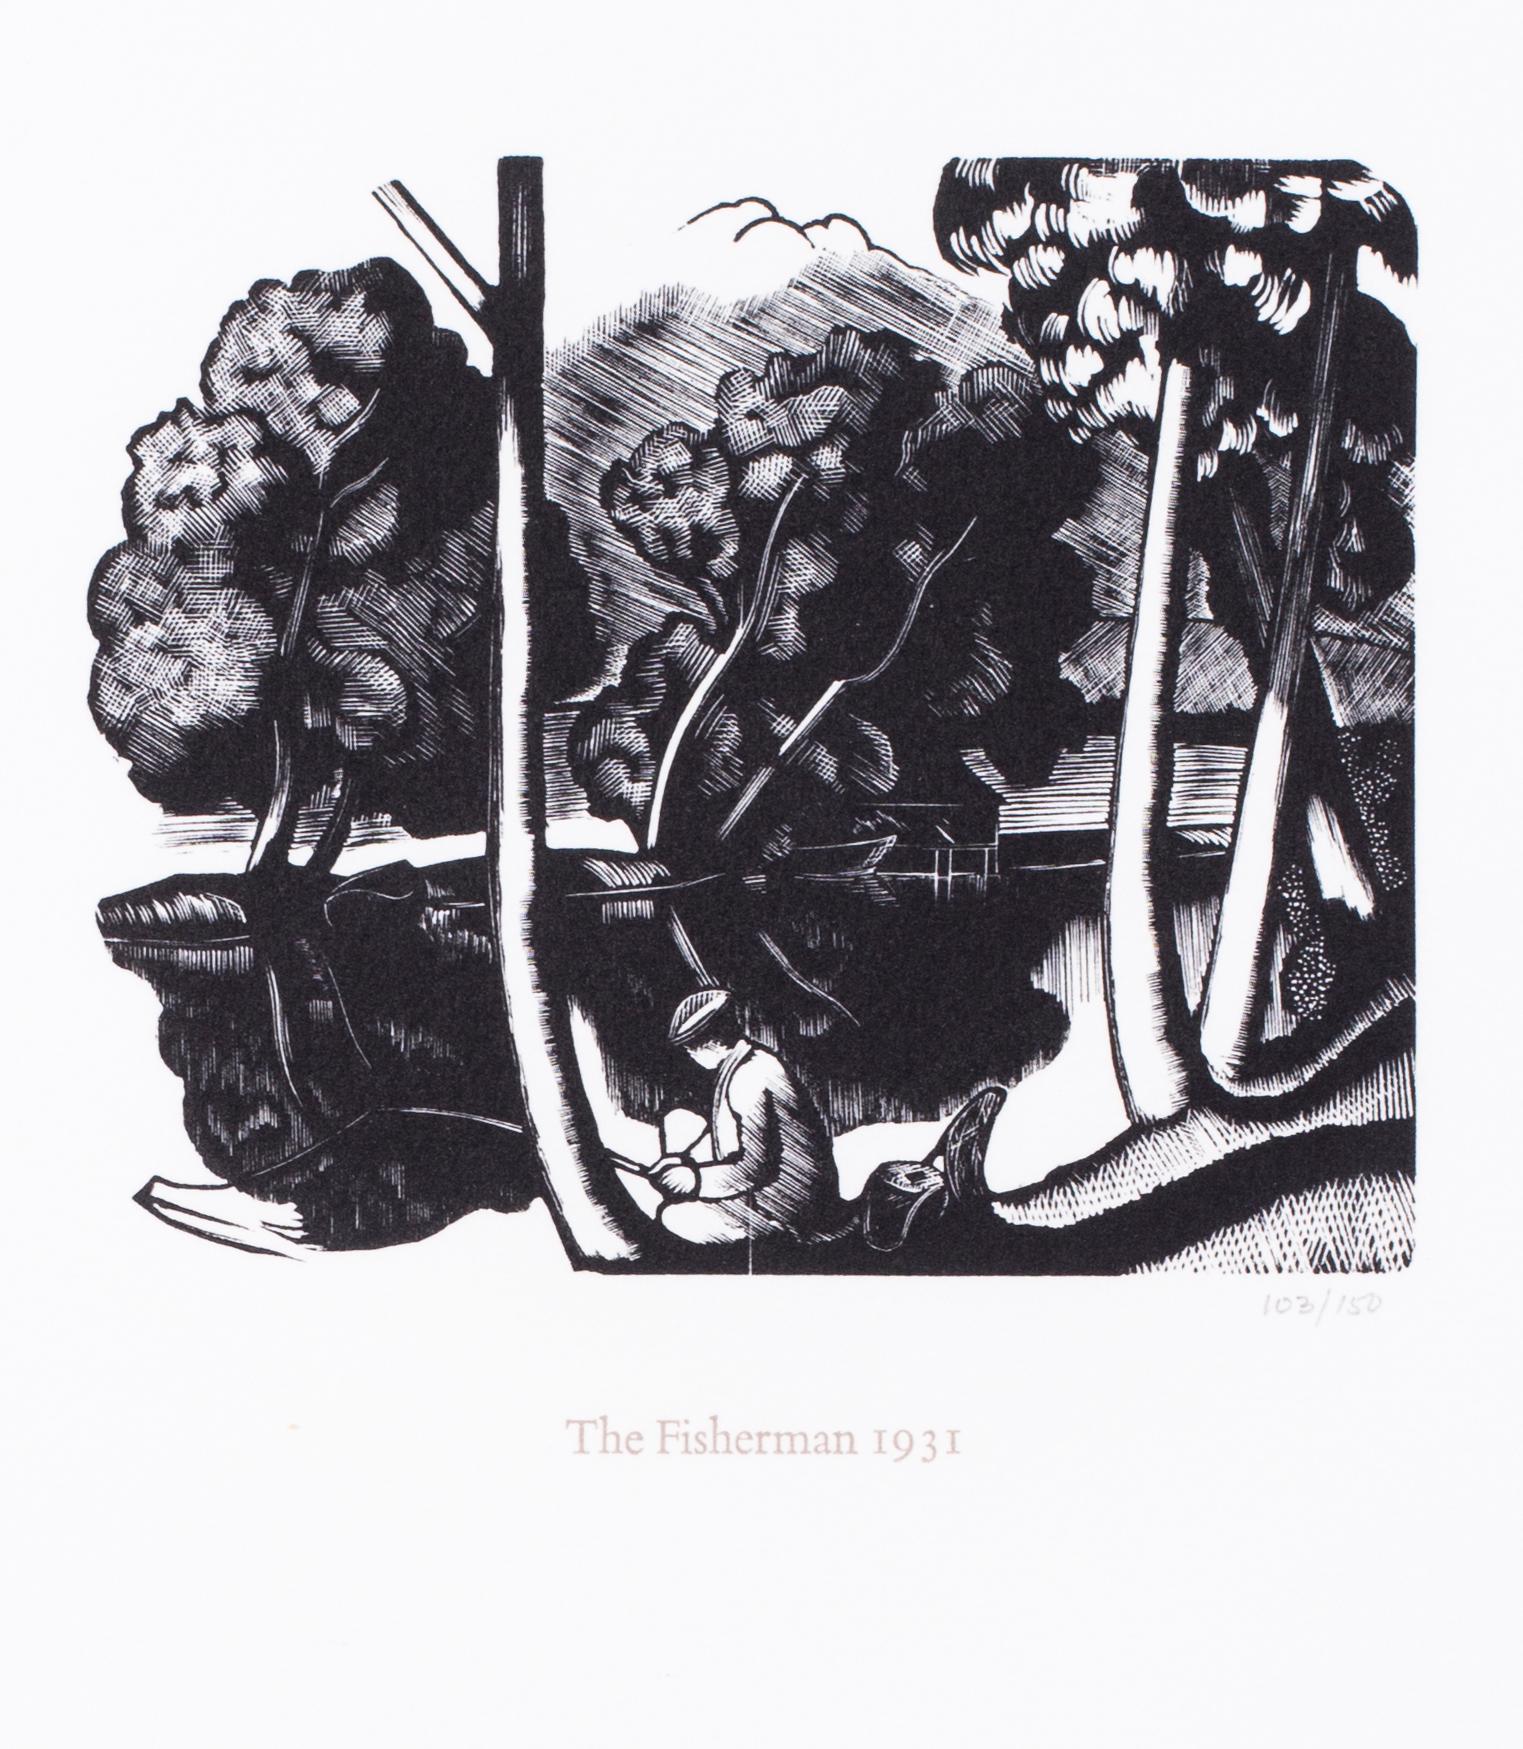 John Nash (British, 1893 – 1877)
Six wood engravings including The book of the tree, Cyclamen Persicum, A cottage in Gloucestershire, Epiphyllium in Flower, The Fisherman, and Threshing
Printed from the original woodblocks, these engravings were